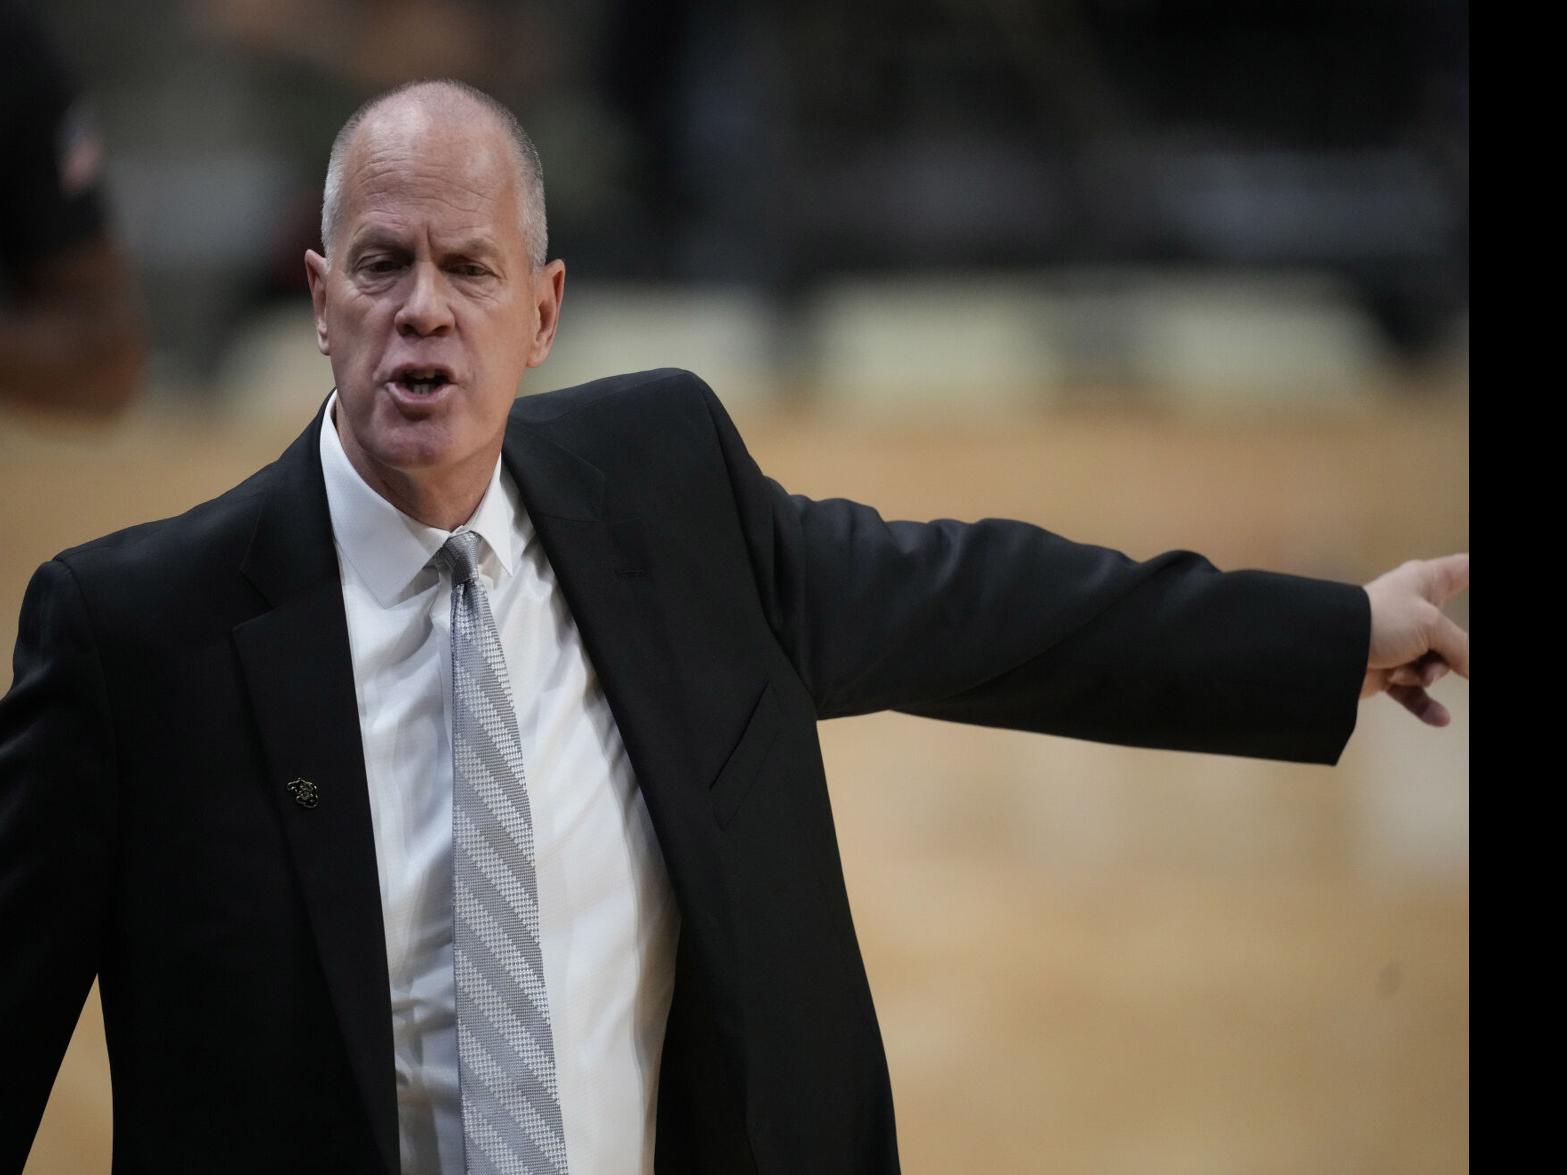 Colorado's matchup with No. 7 Kansas canceled due to COVID-19, Sports